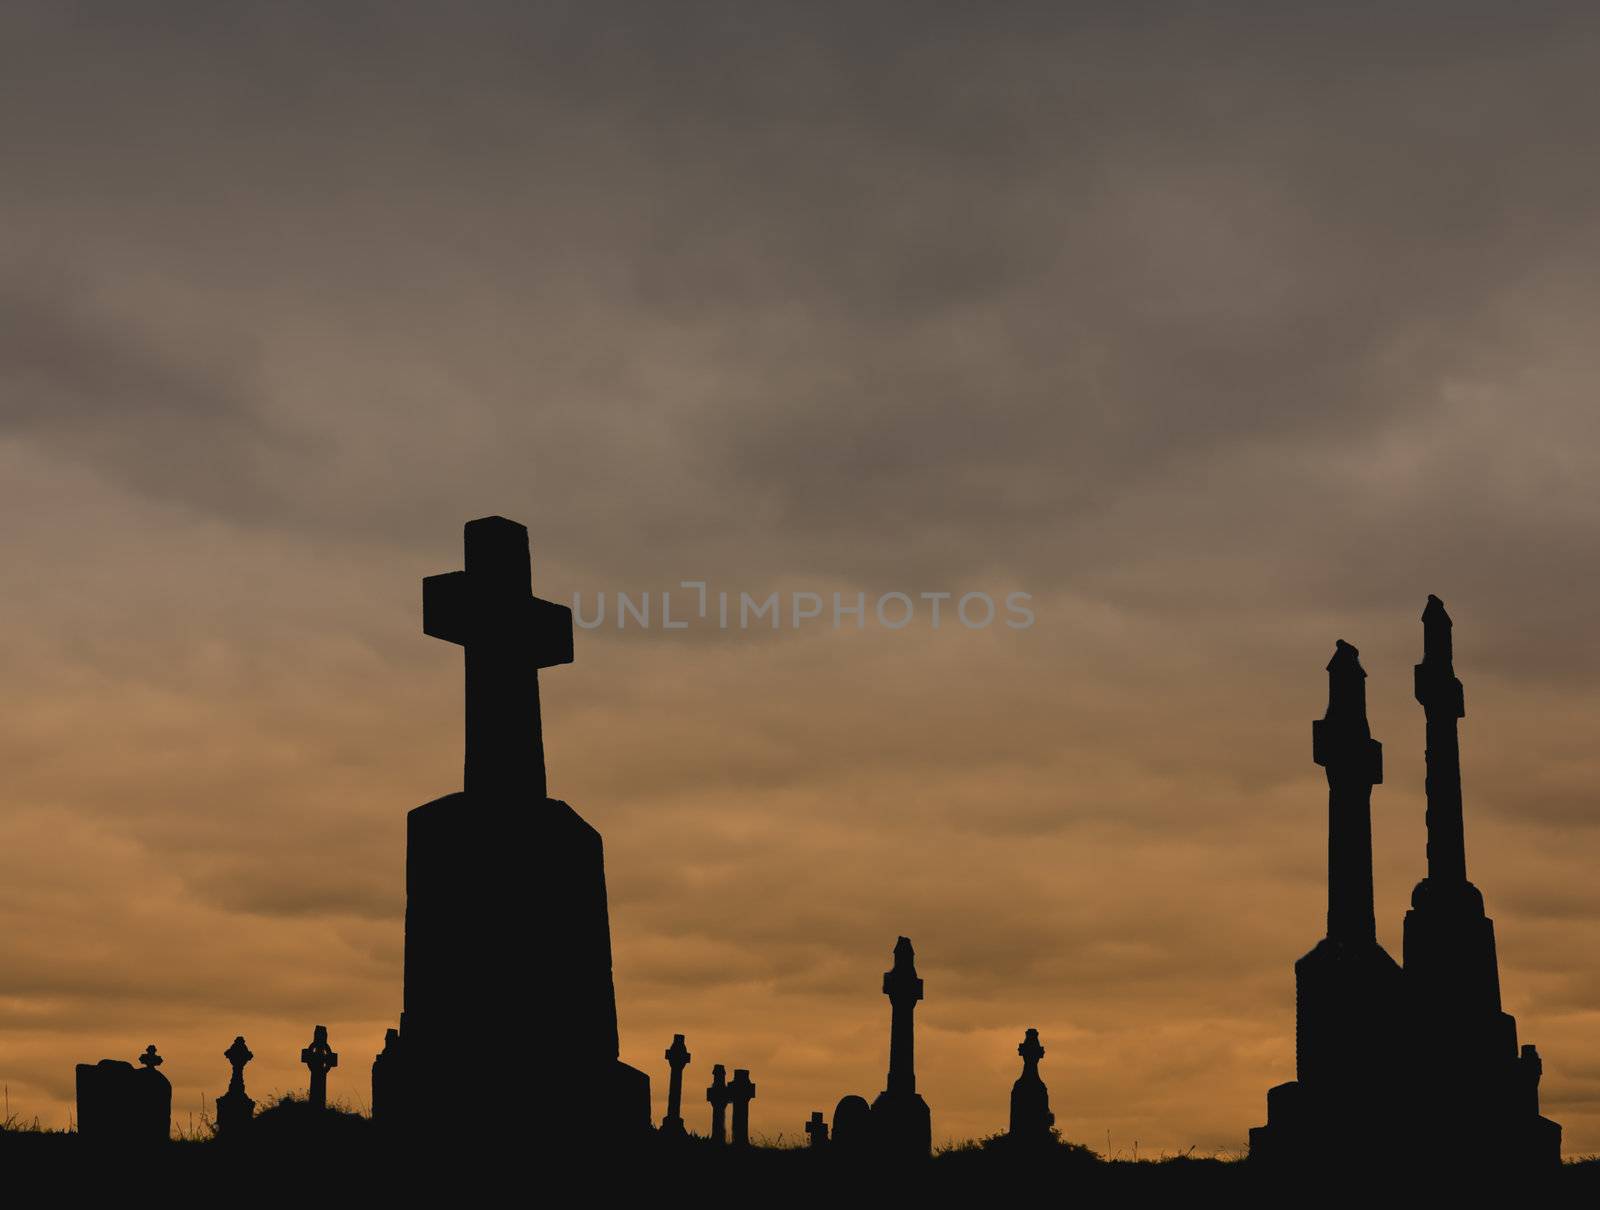 Silhouettes of Christian and Celtic crosses against a colored cloudy sky. Perfect for Halloween!